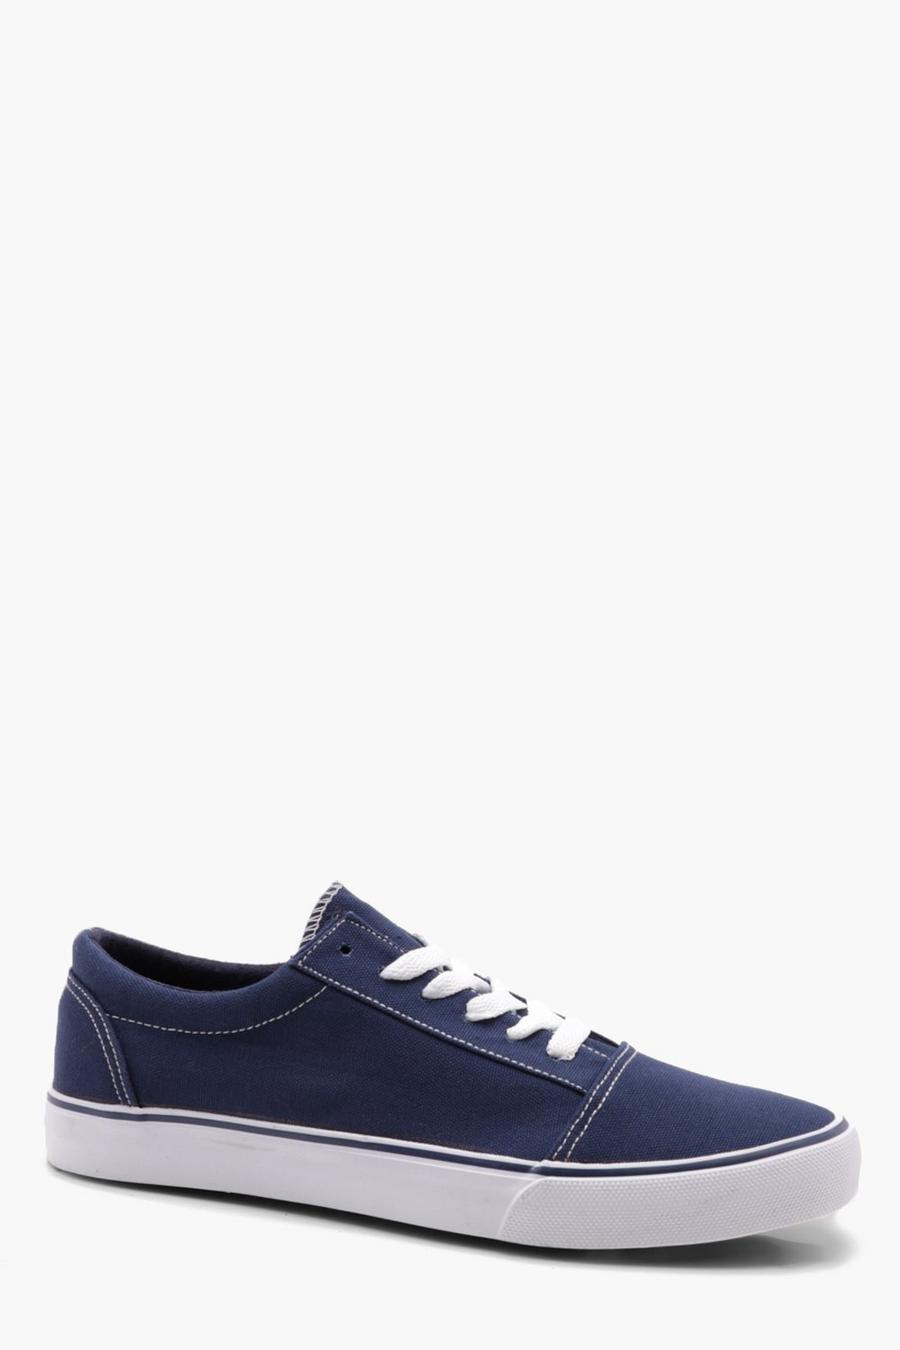 Navy Lace Up Toe Cap Plimsole image number 1